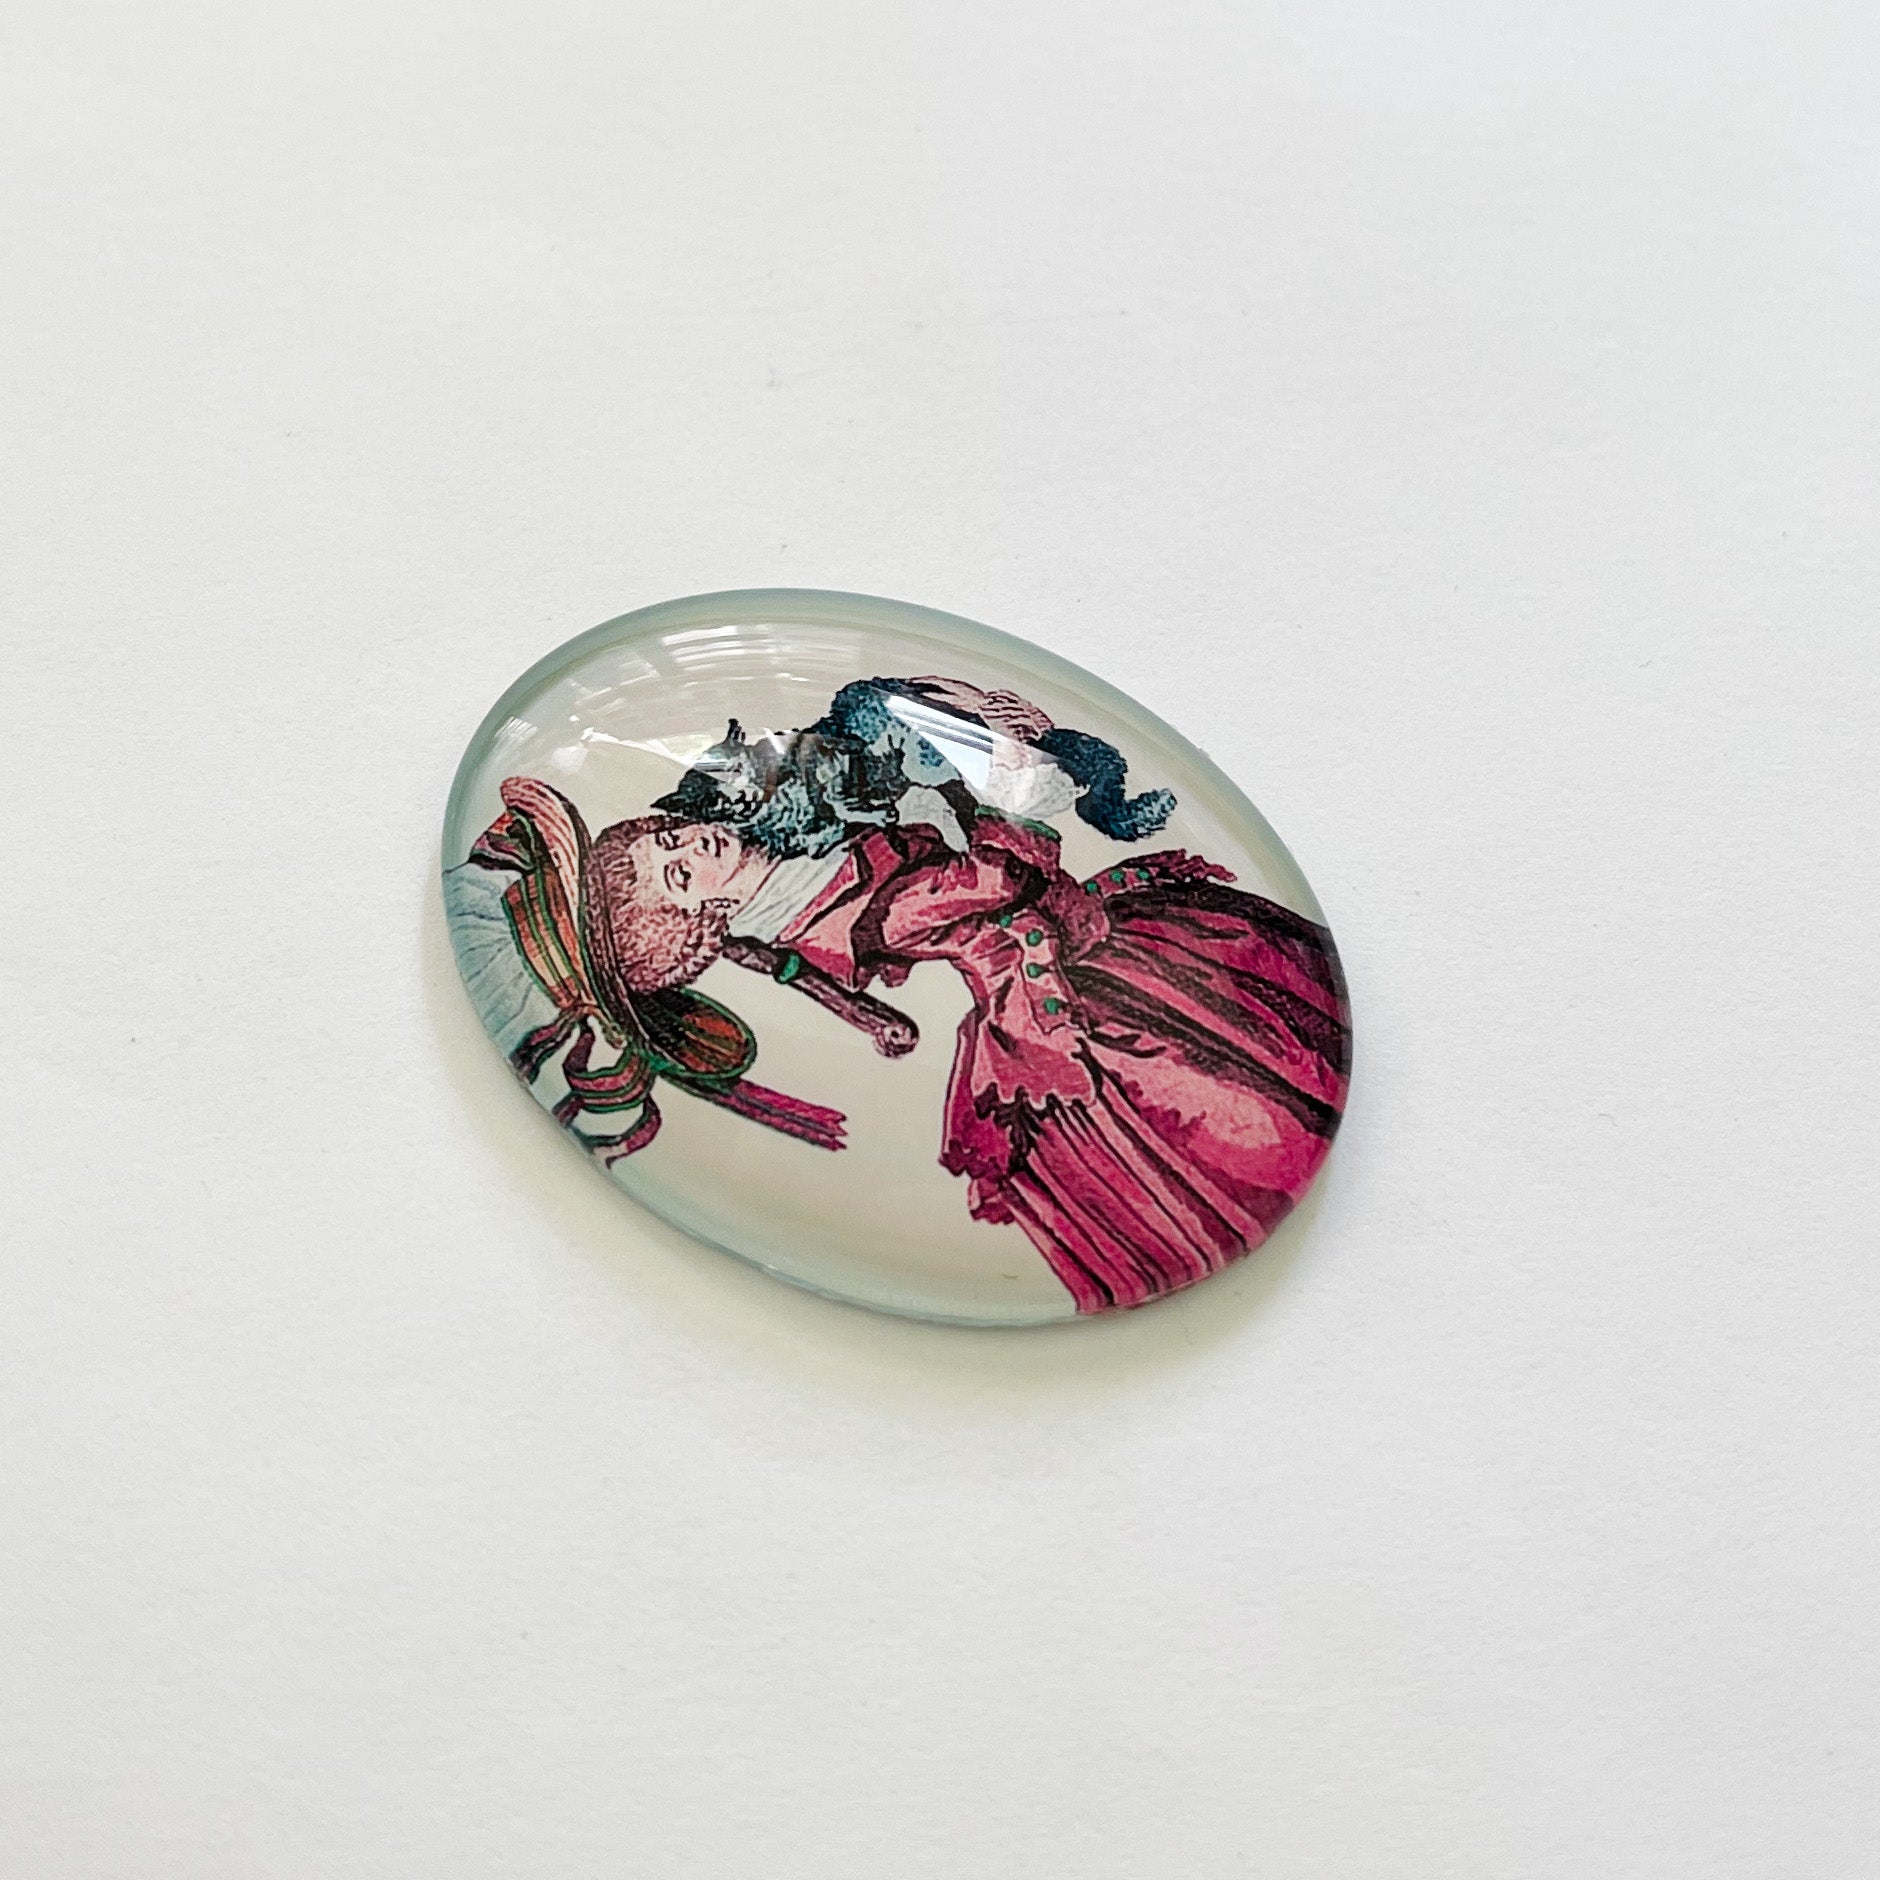 Baroque Woman with Cat Illustration Vintage Cameo Cabochon